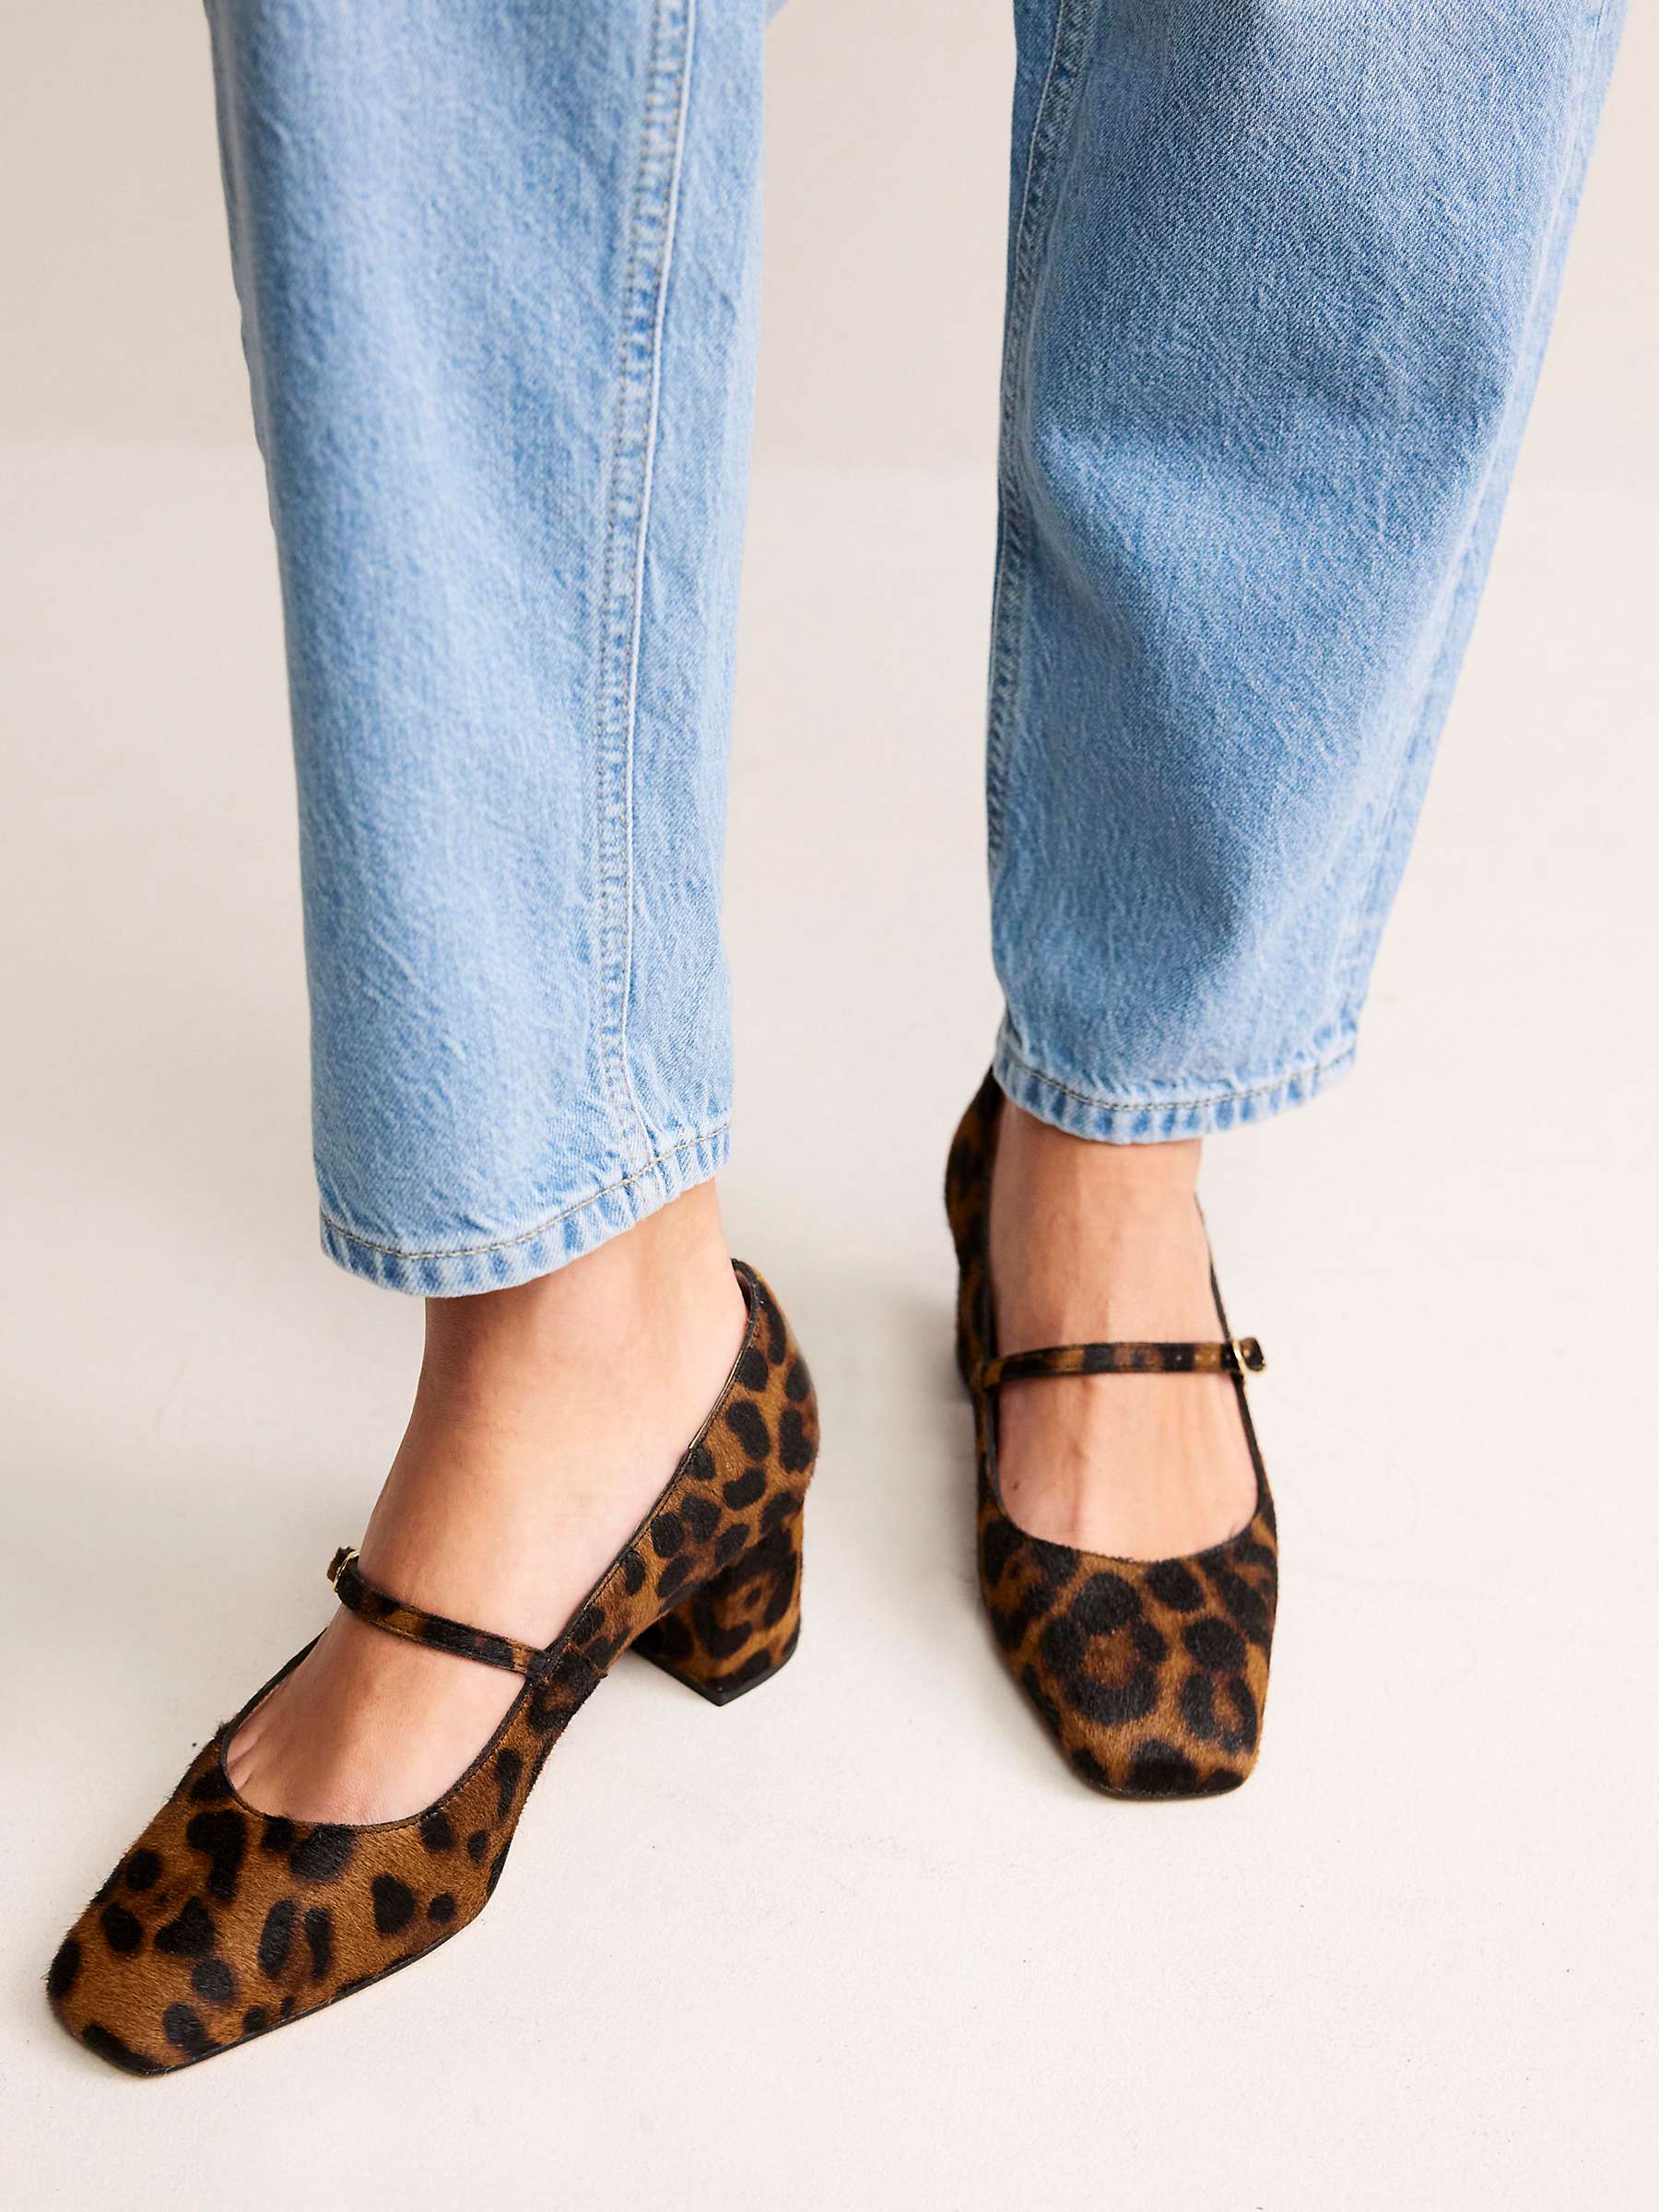 Buy Boden Mary Jane Block Heel Shoes, Classic Leopard Pony Online at johnlewis.com